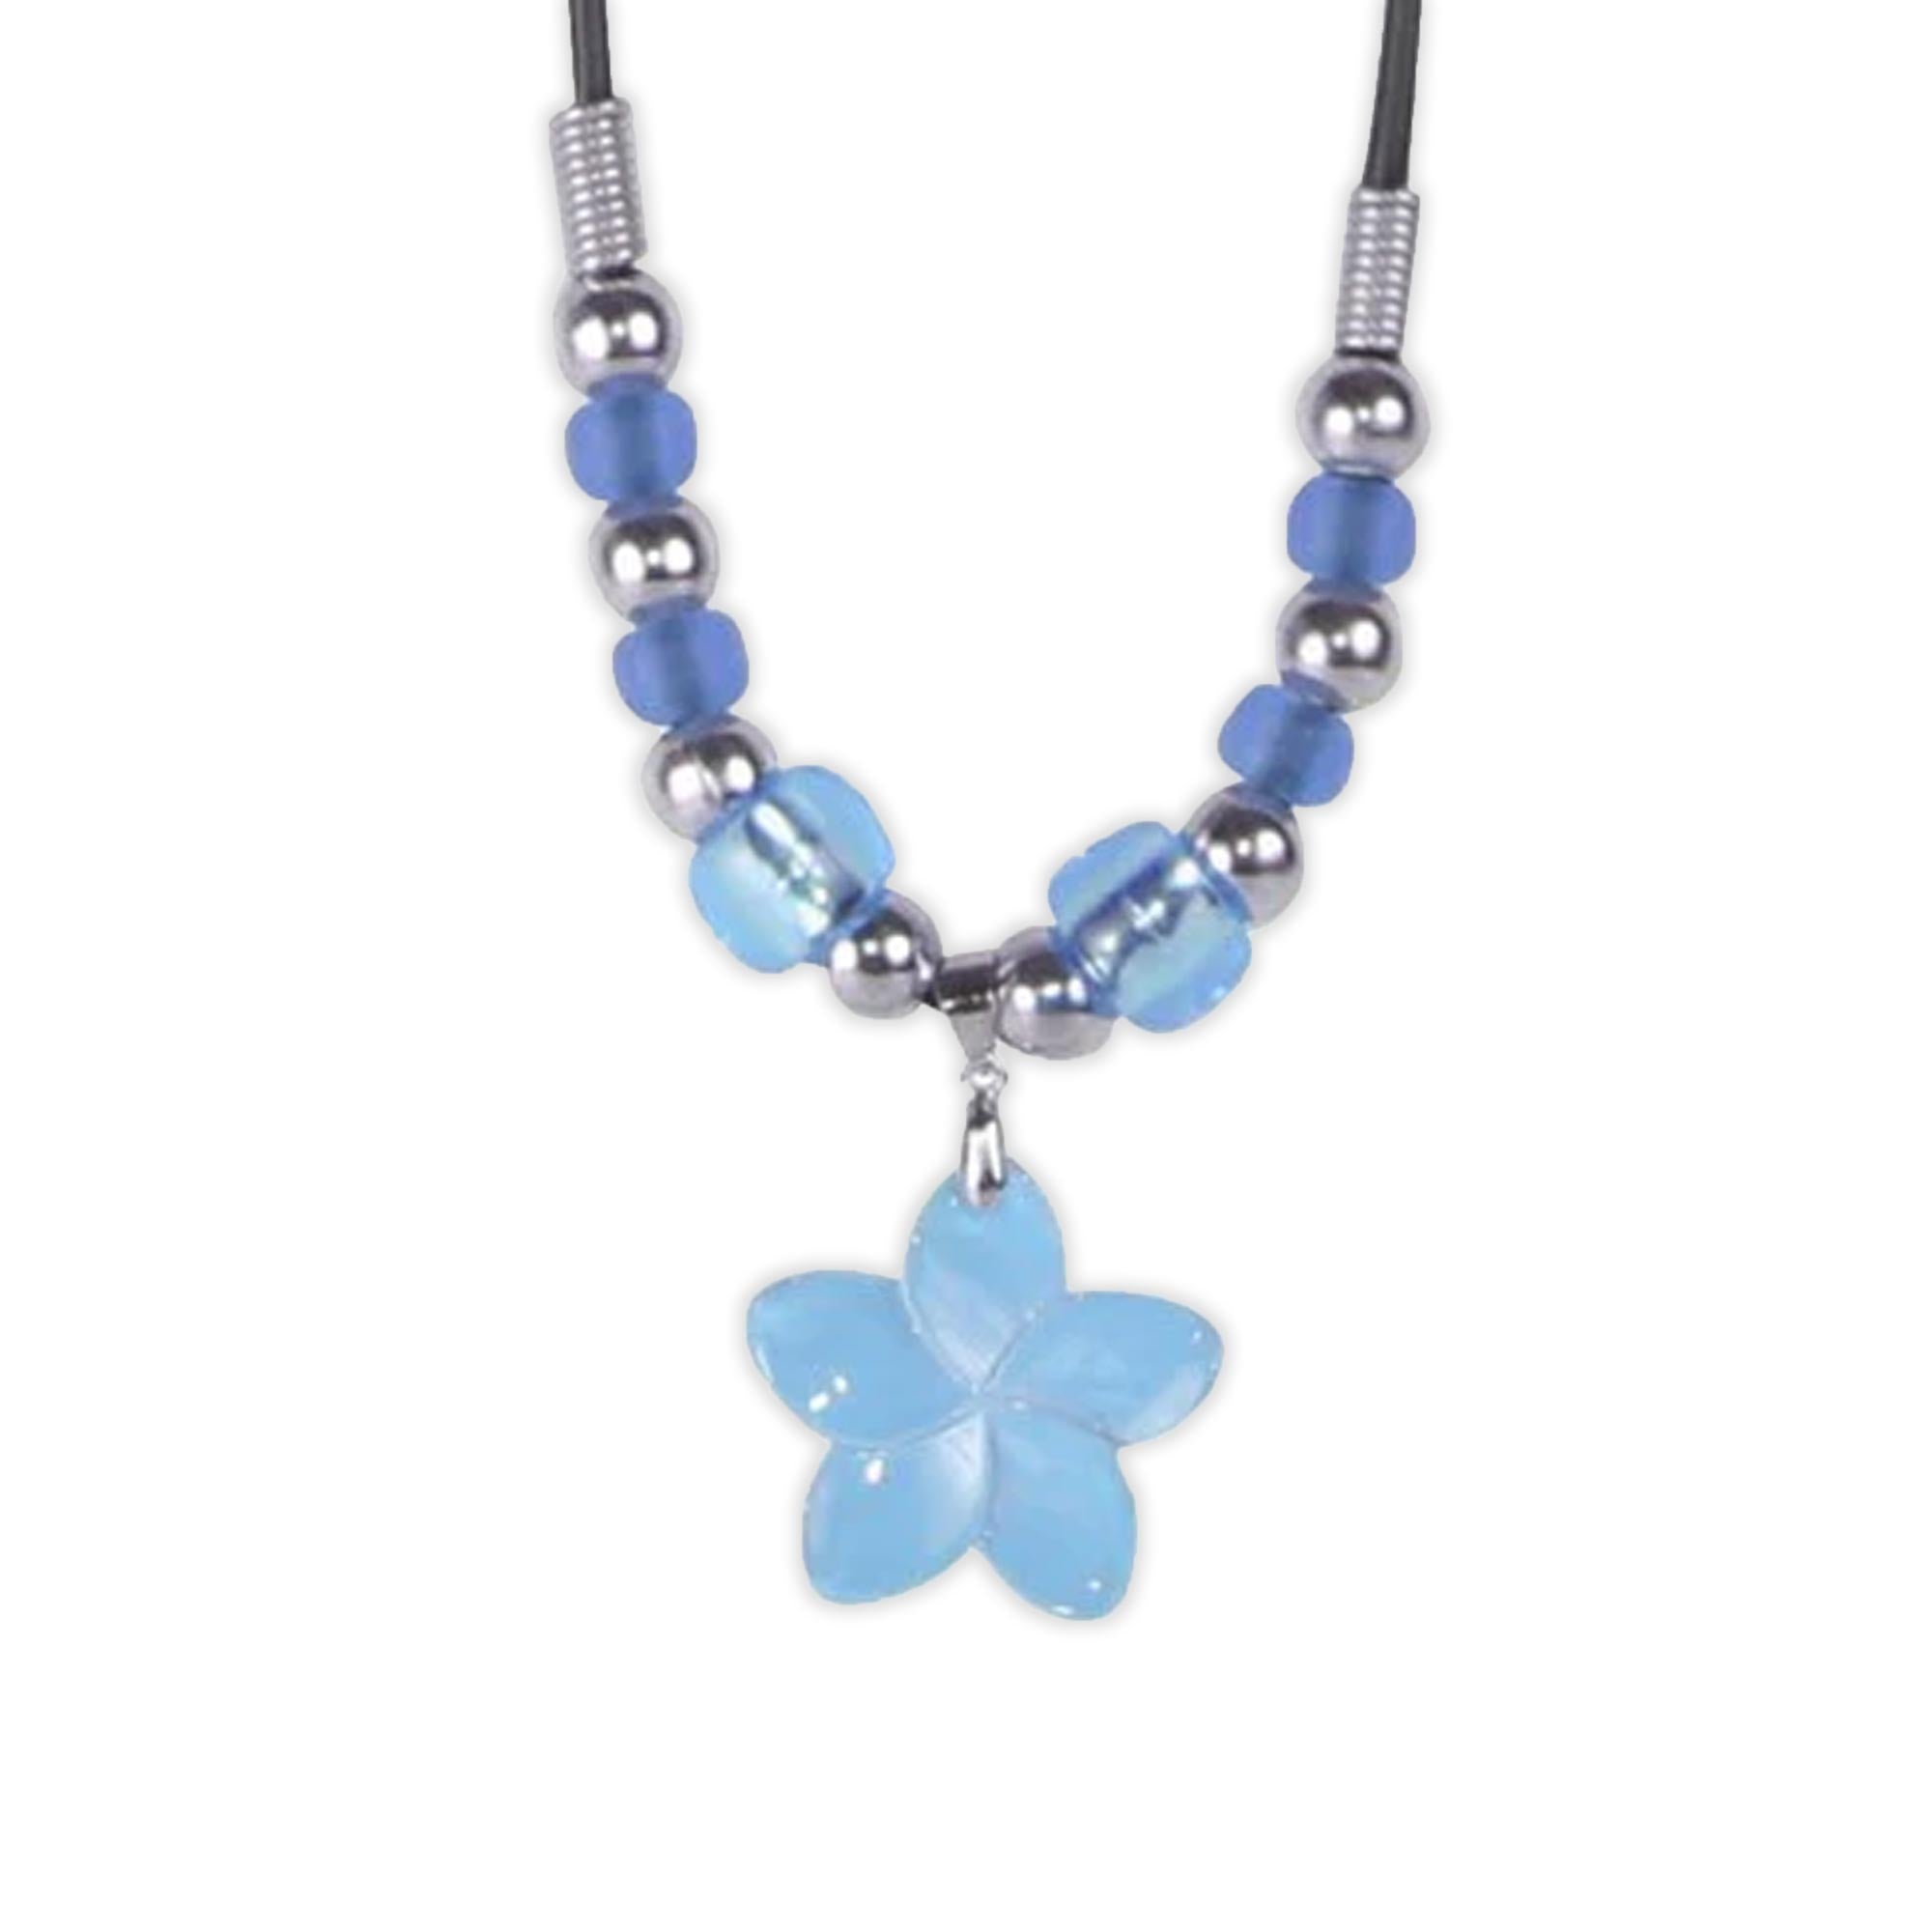 Del Sol Color-Changing Flower Necklace - Blue to White